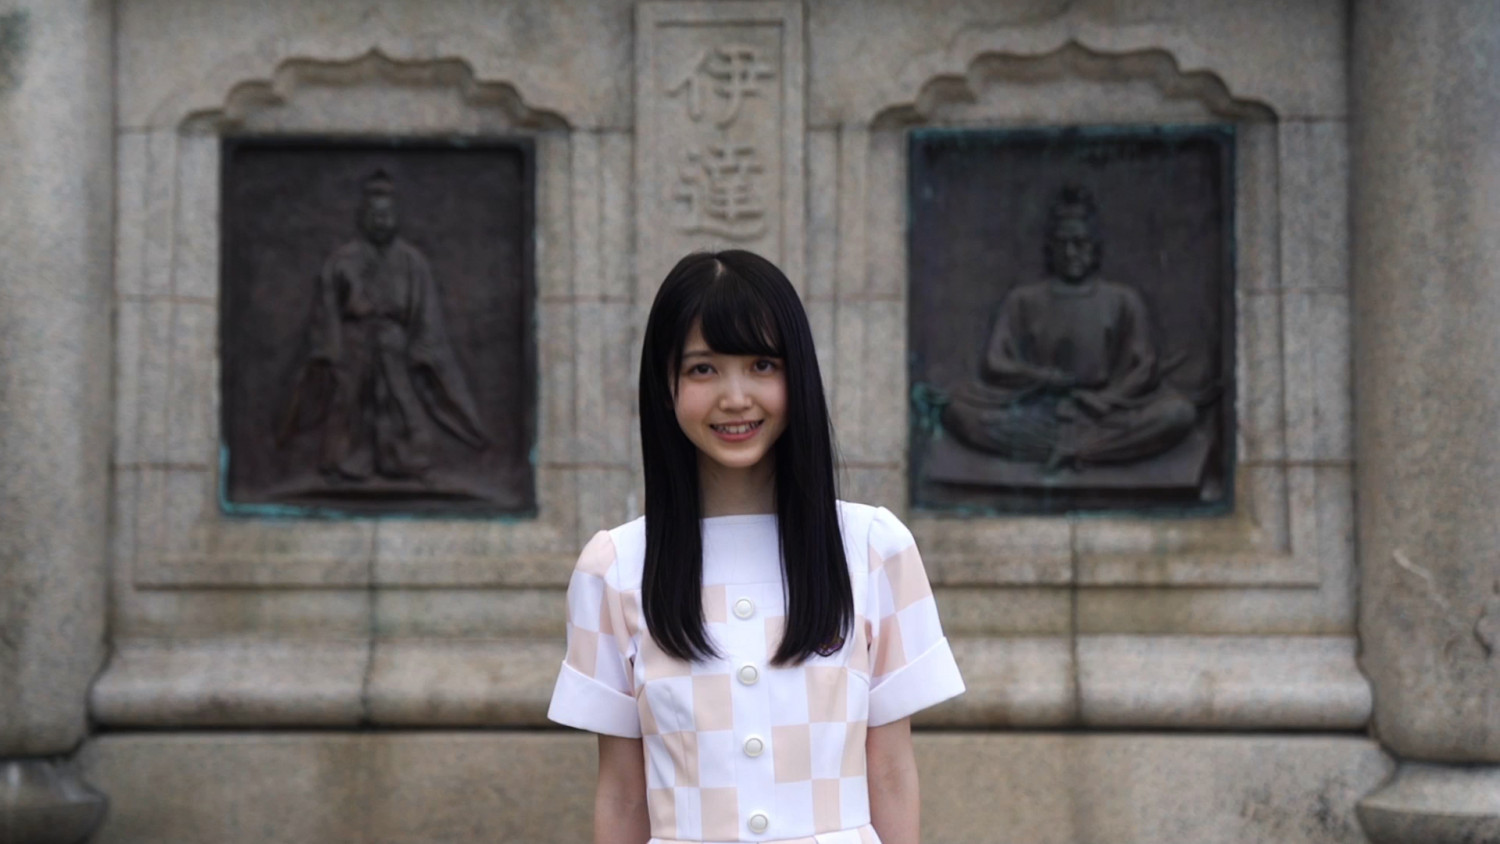 Nogizaka46’s Shiori Kubo Spreads the Charms of Miyagi in the New Video Series!